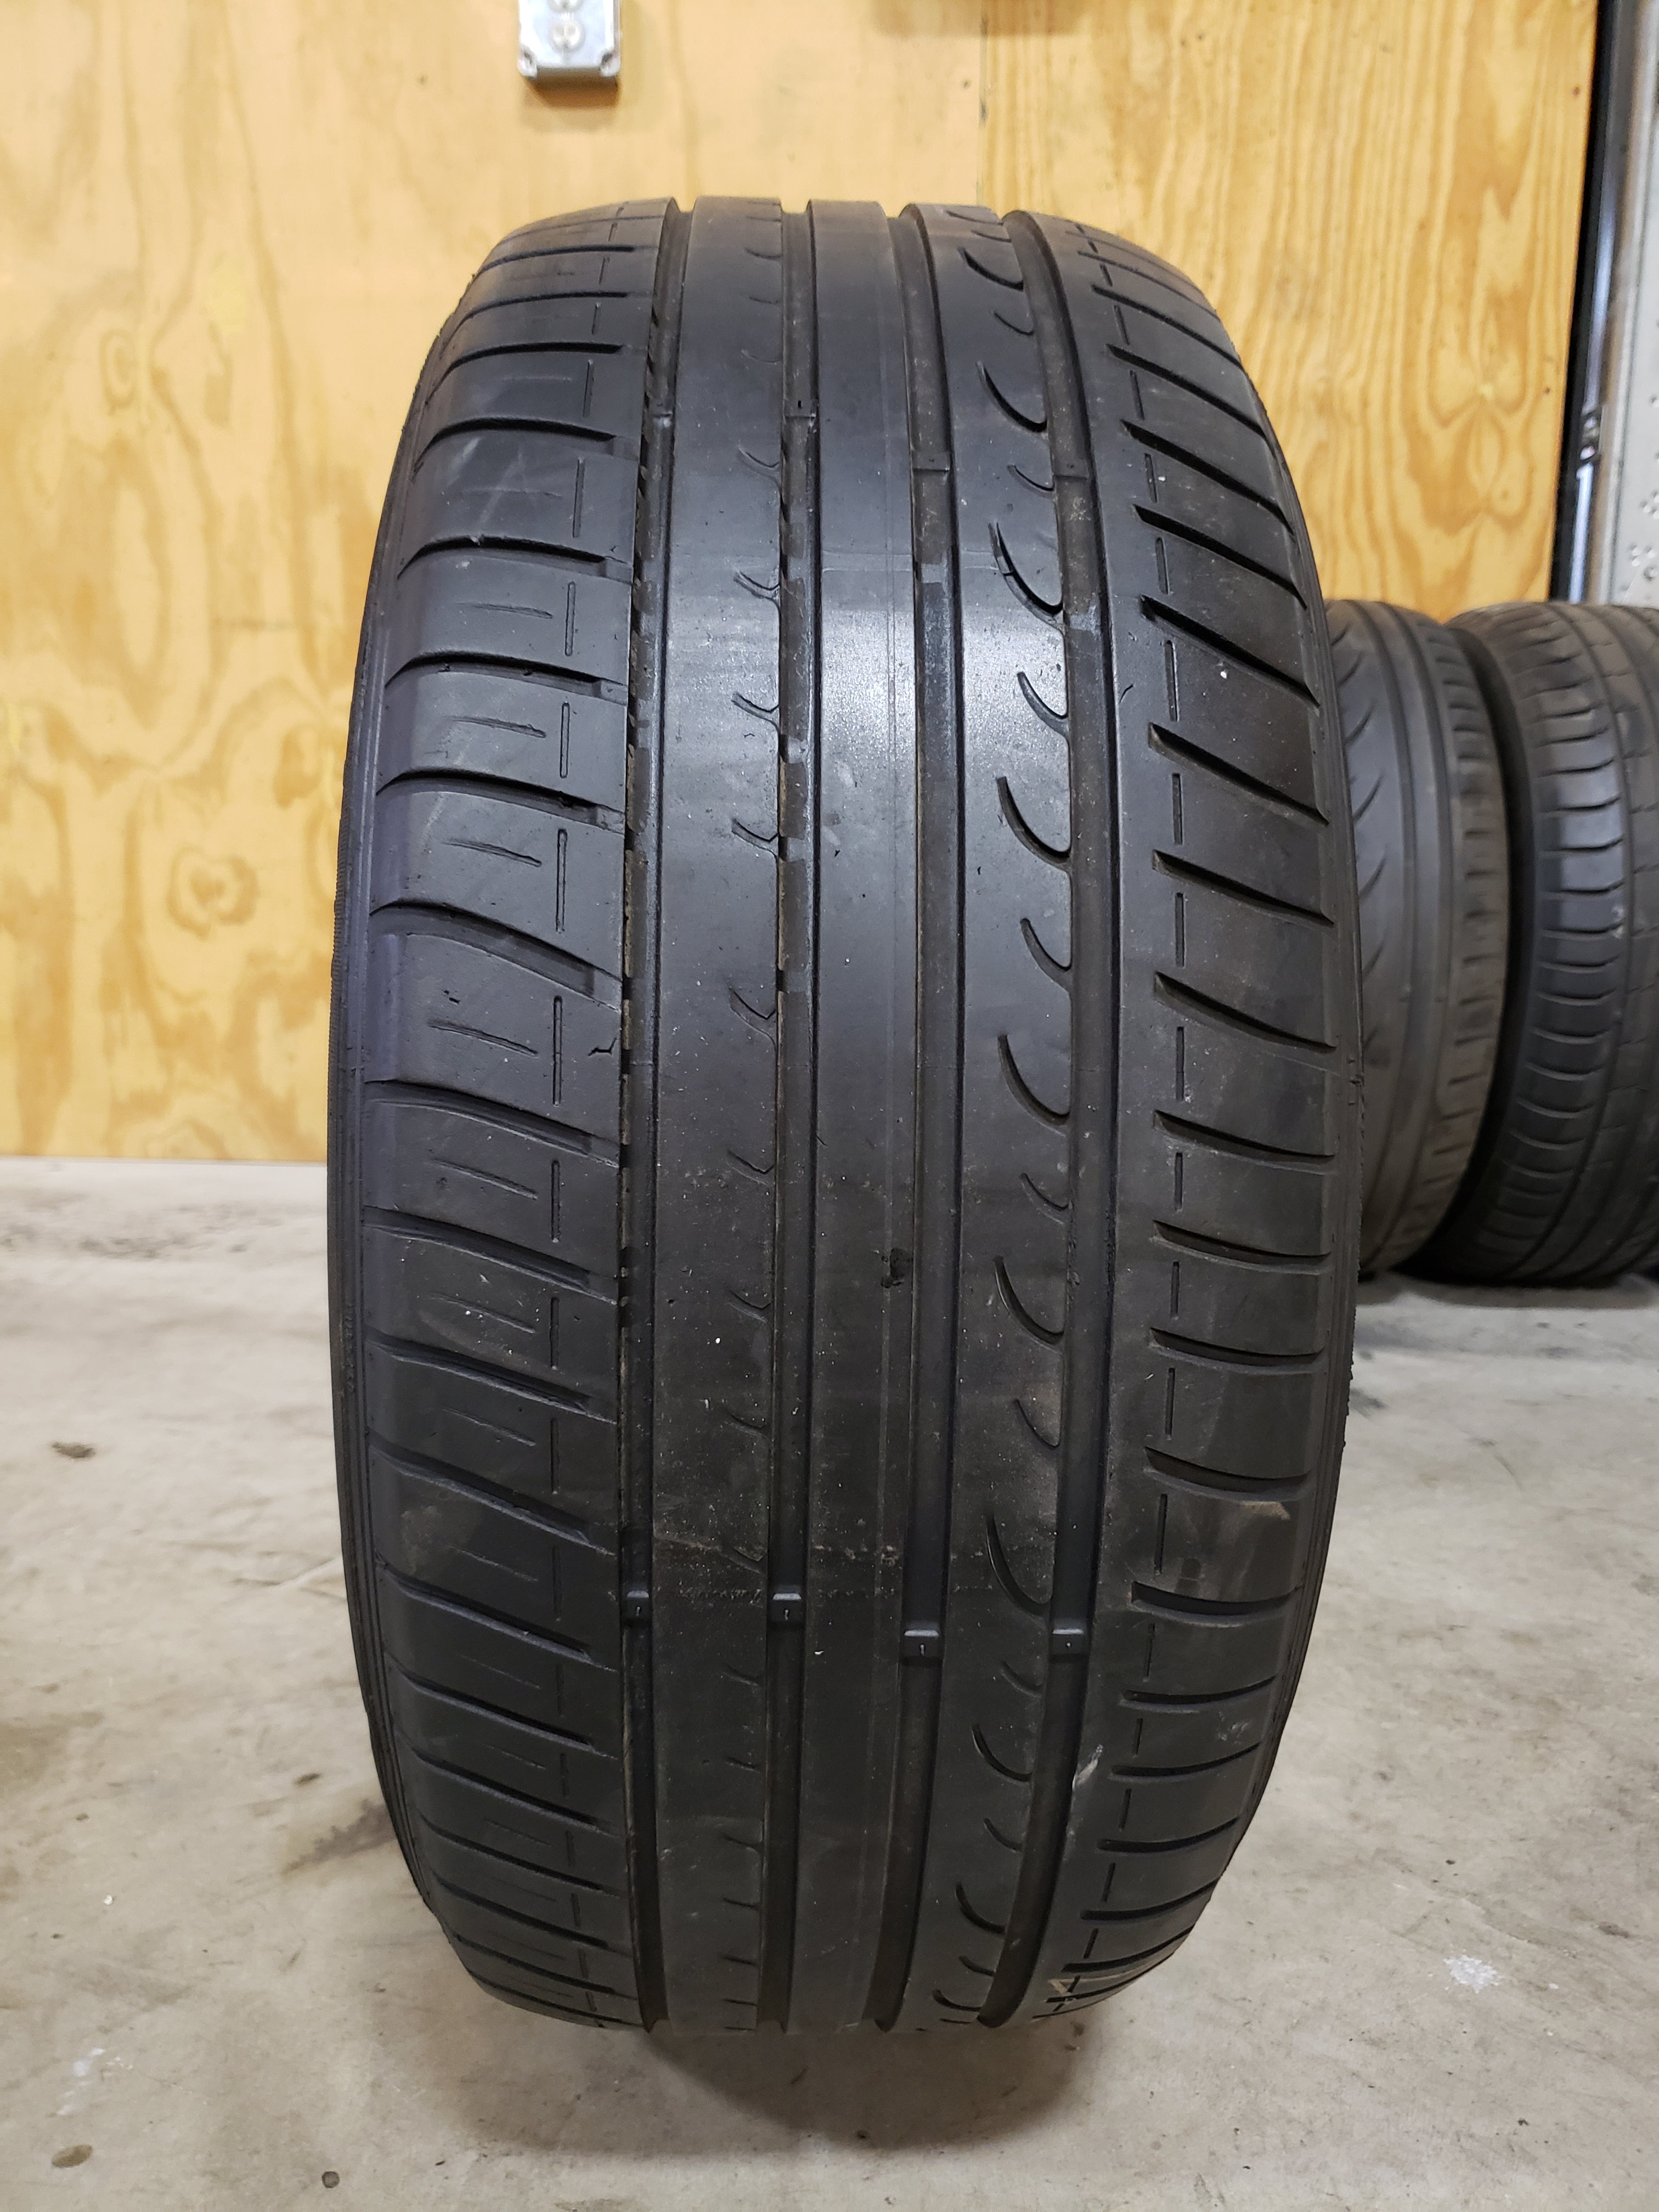 SINGLE 225/55R16 Used Tires Tread SP | XL Dunlop High - Fast 95V Response Used – Tires Sport